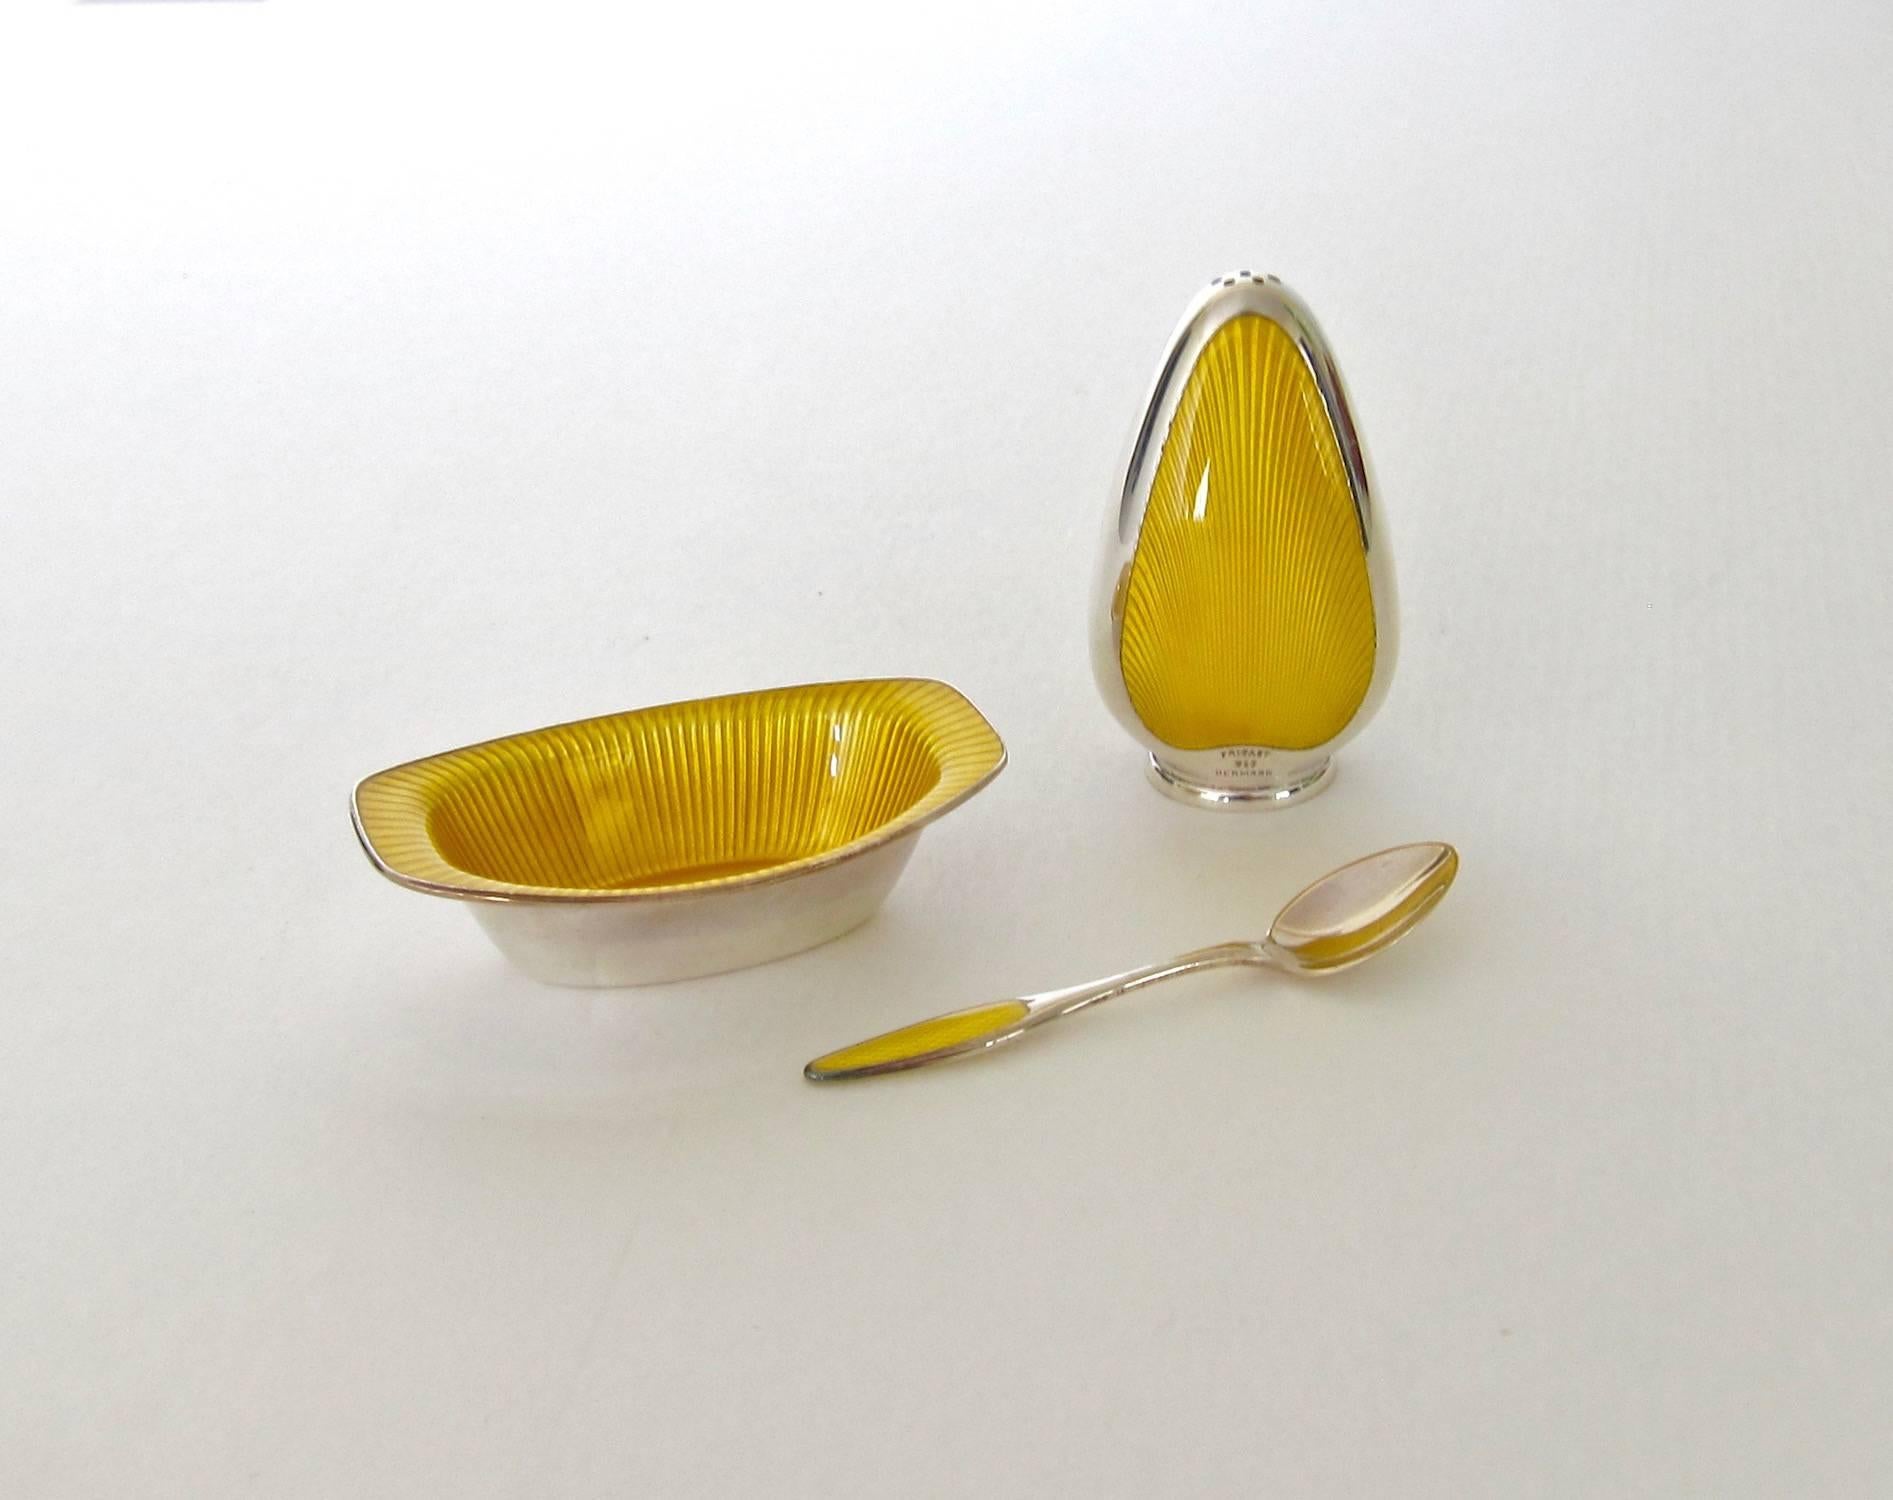 An open salt and pepper set in sterling silver skillfully decorated with contrasting golden yellow guilloche enameling from Frigast Silversmiths of Copenhagen, Denmark, active 1958-1976.

The boxed set consists of an open salt cellar with a